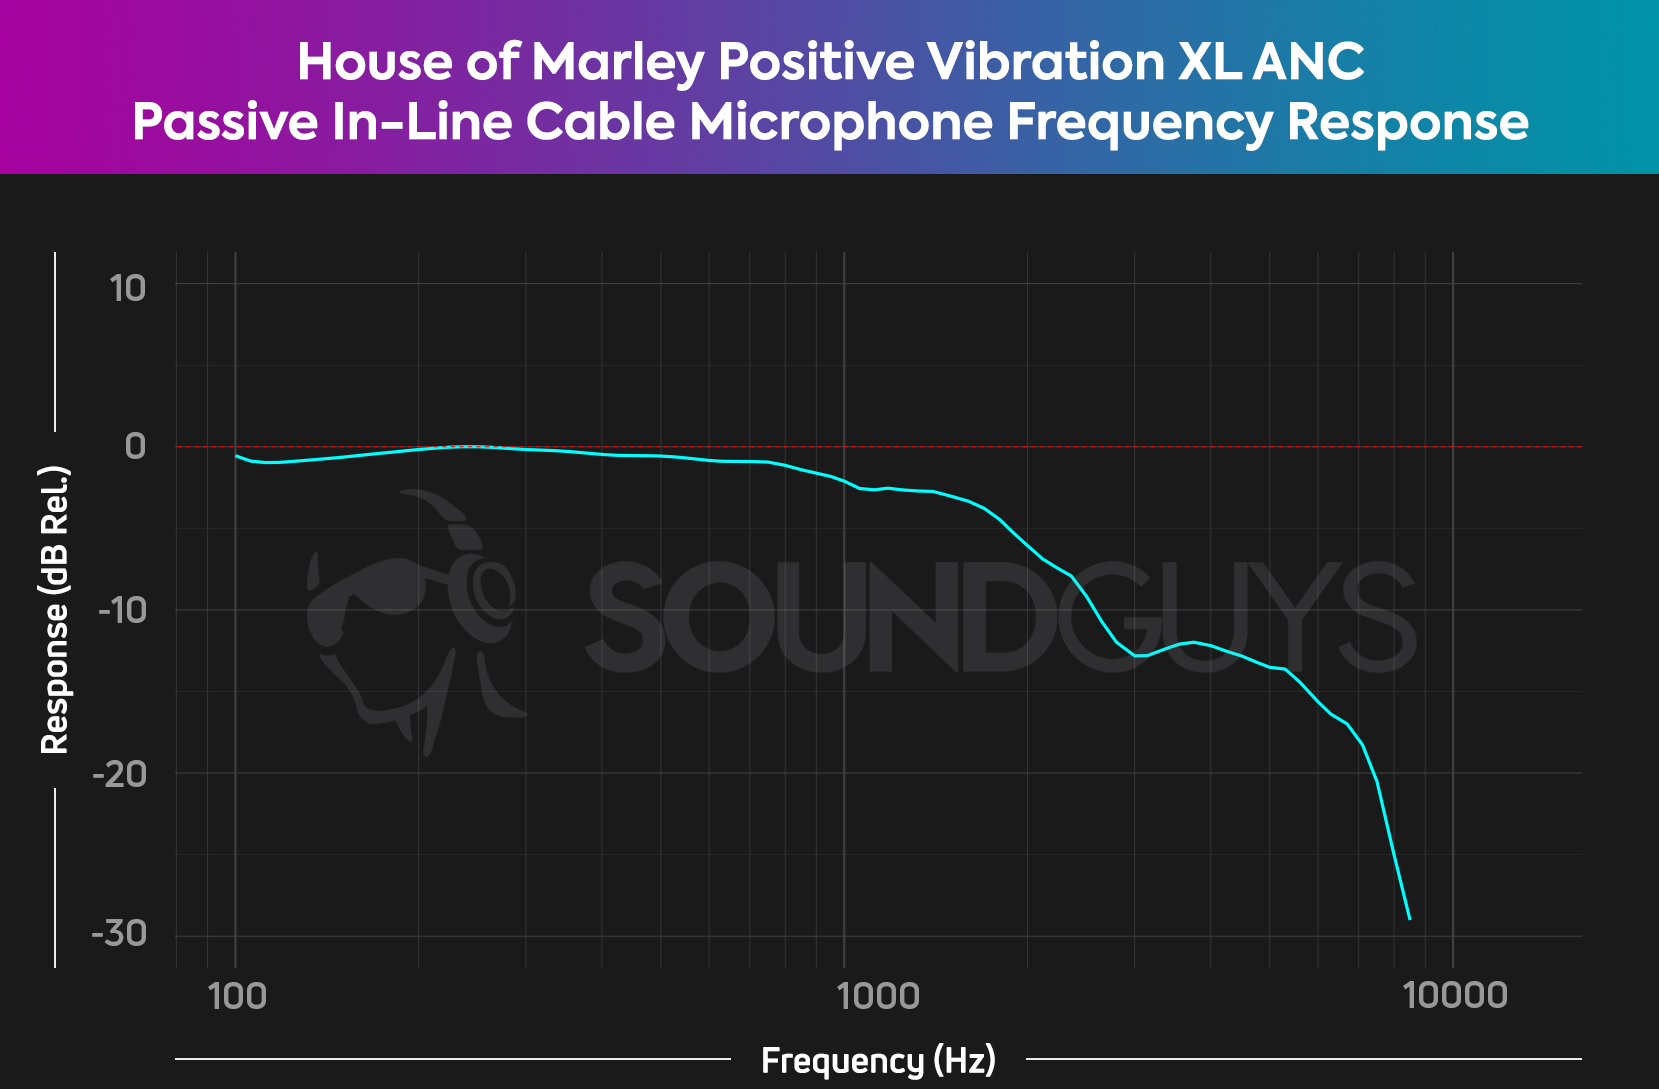 The graph shows the wired microphone performance of the House of Marley Positive Vibration XL ANC.